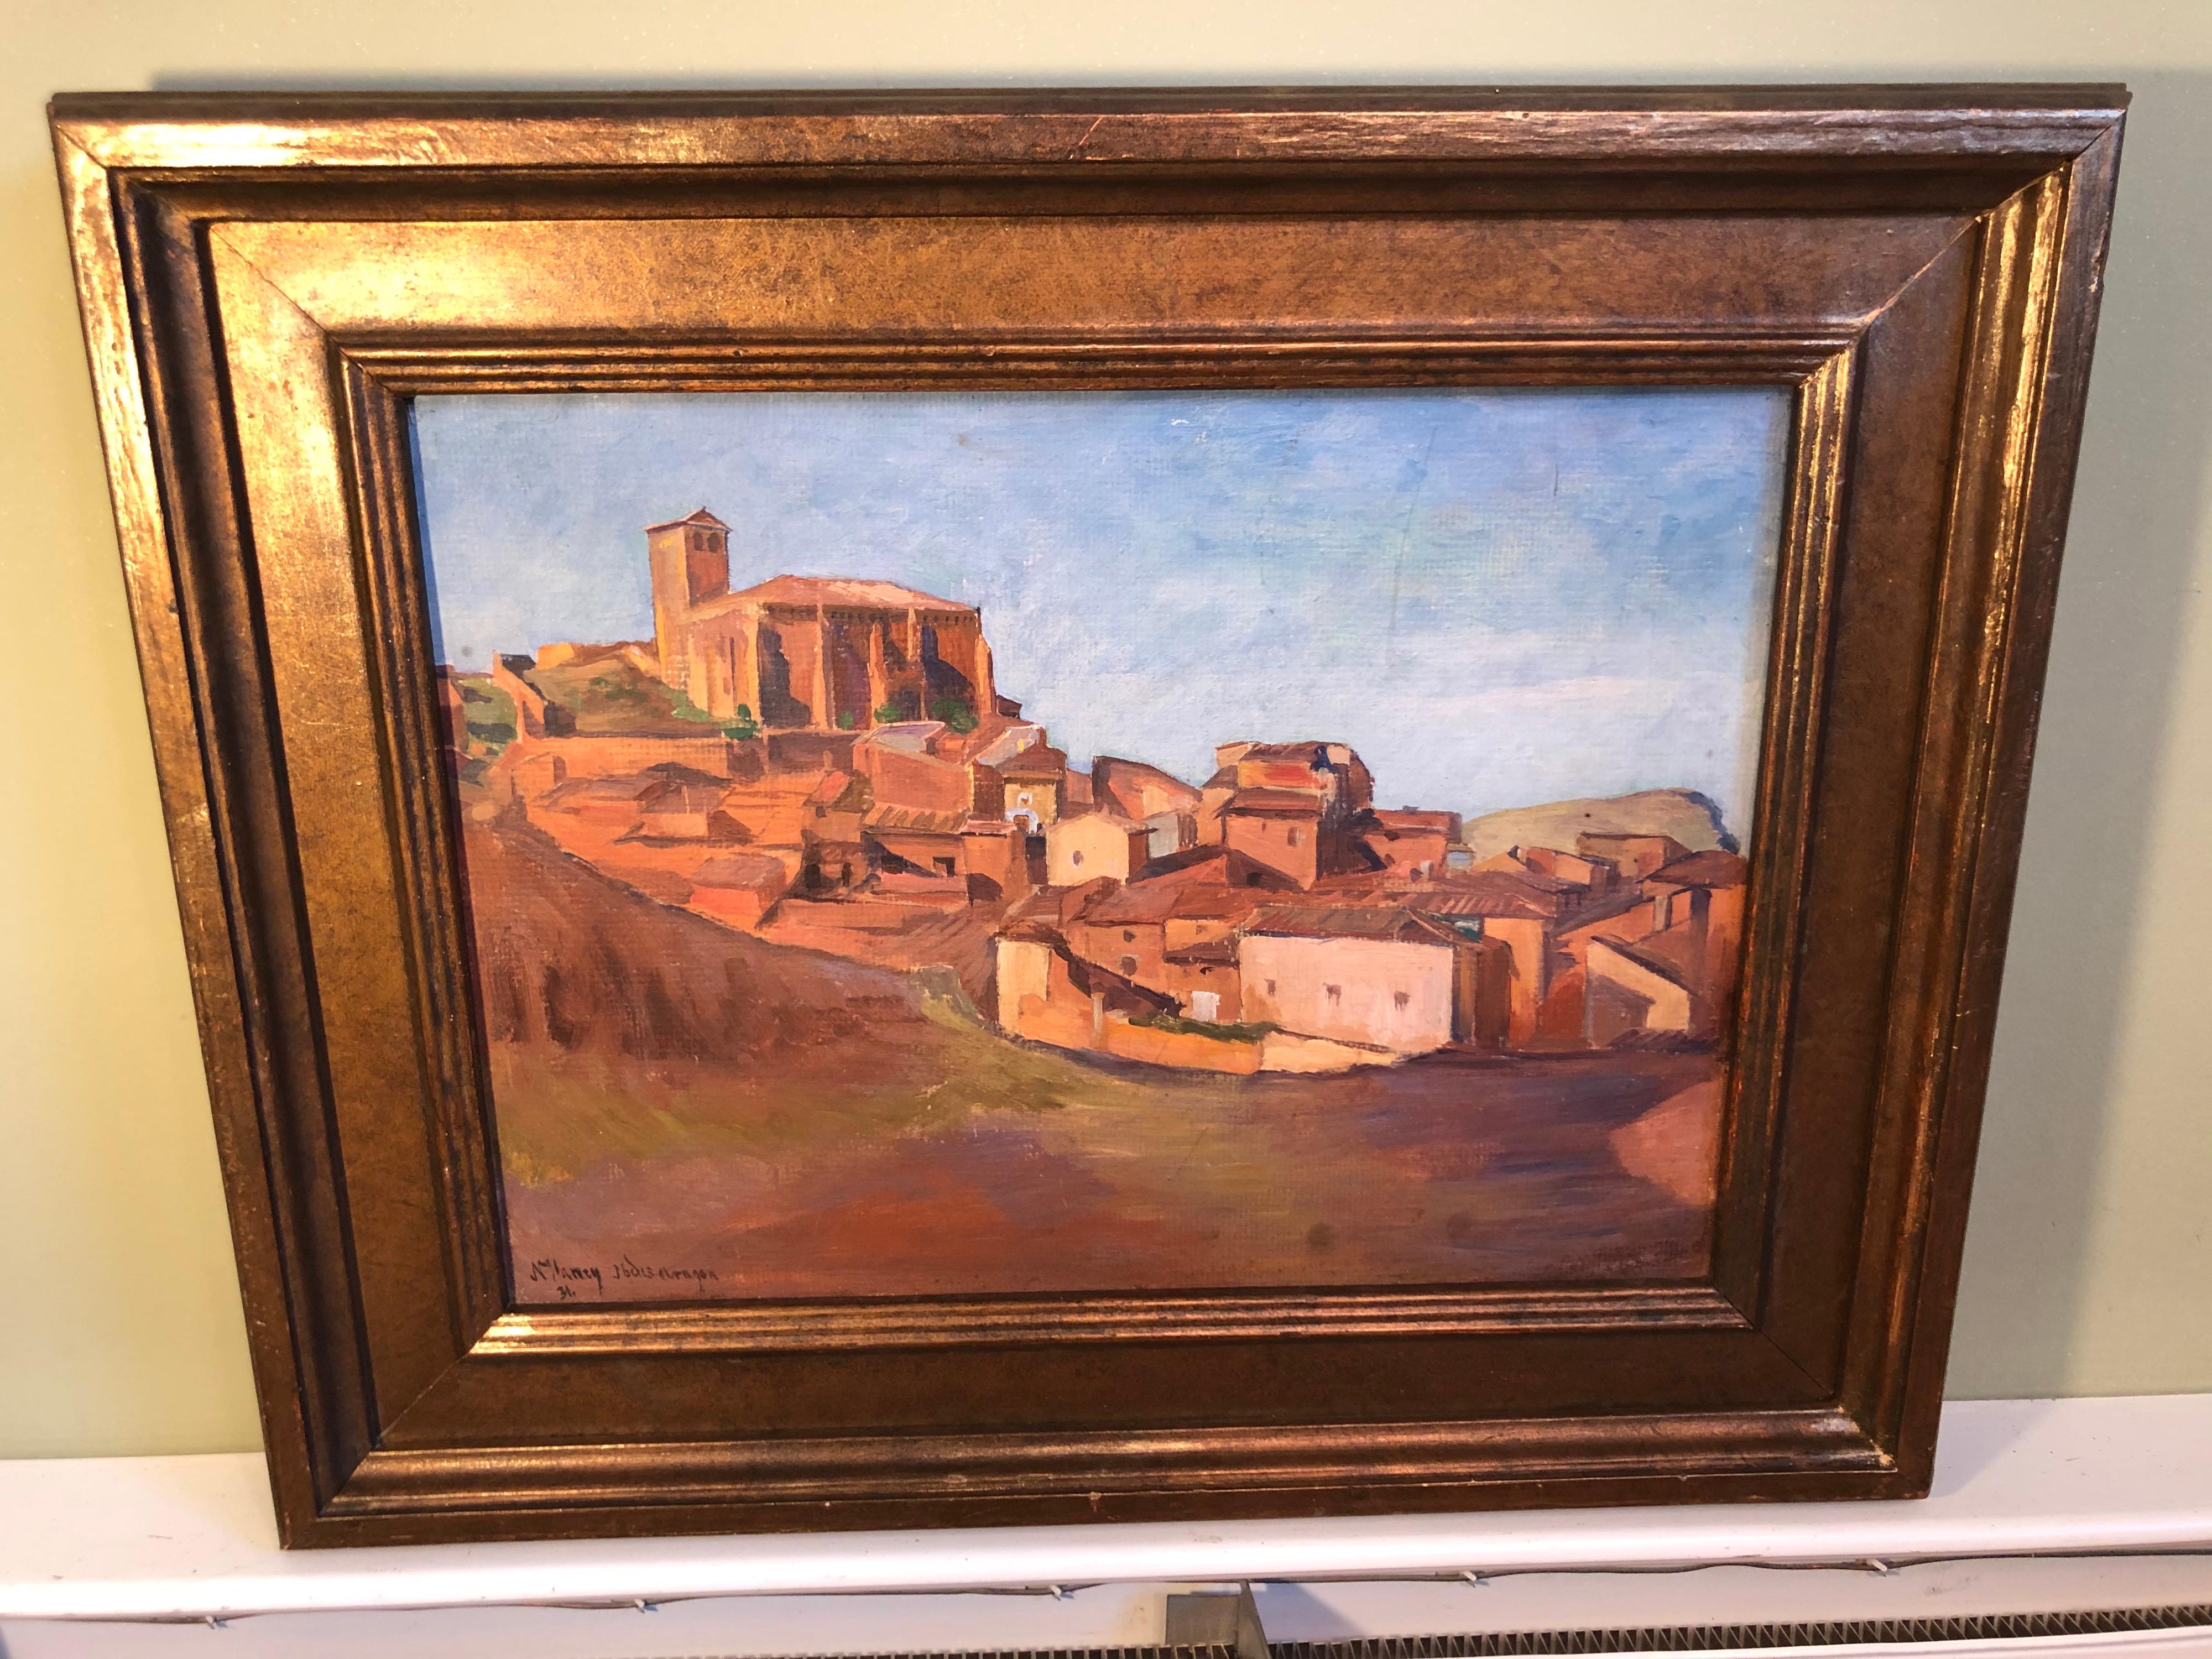 Signed Southwestern painting of the Aragon Region in Spain.
Dated 1931. Oil on board, gilt solid wooden antique frame.